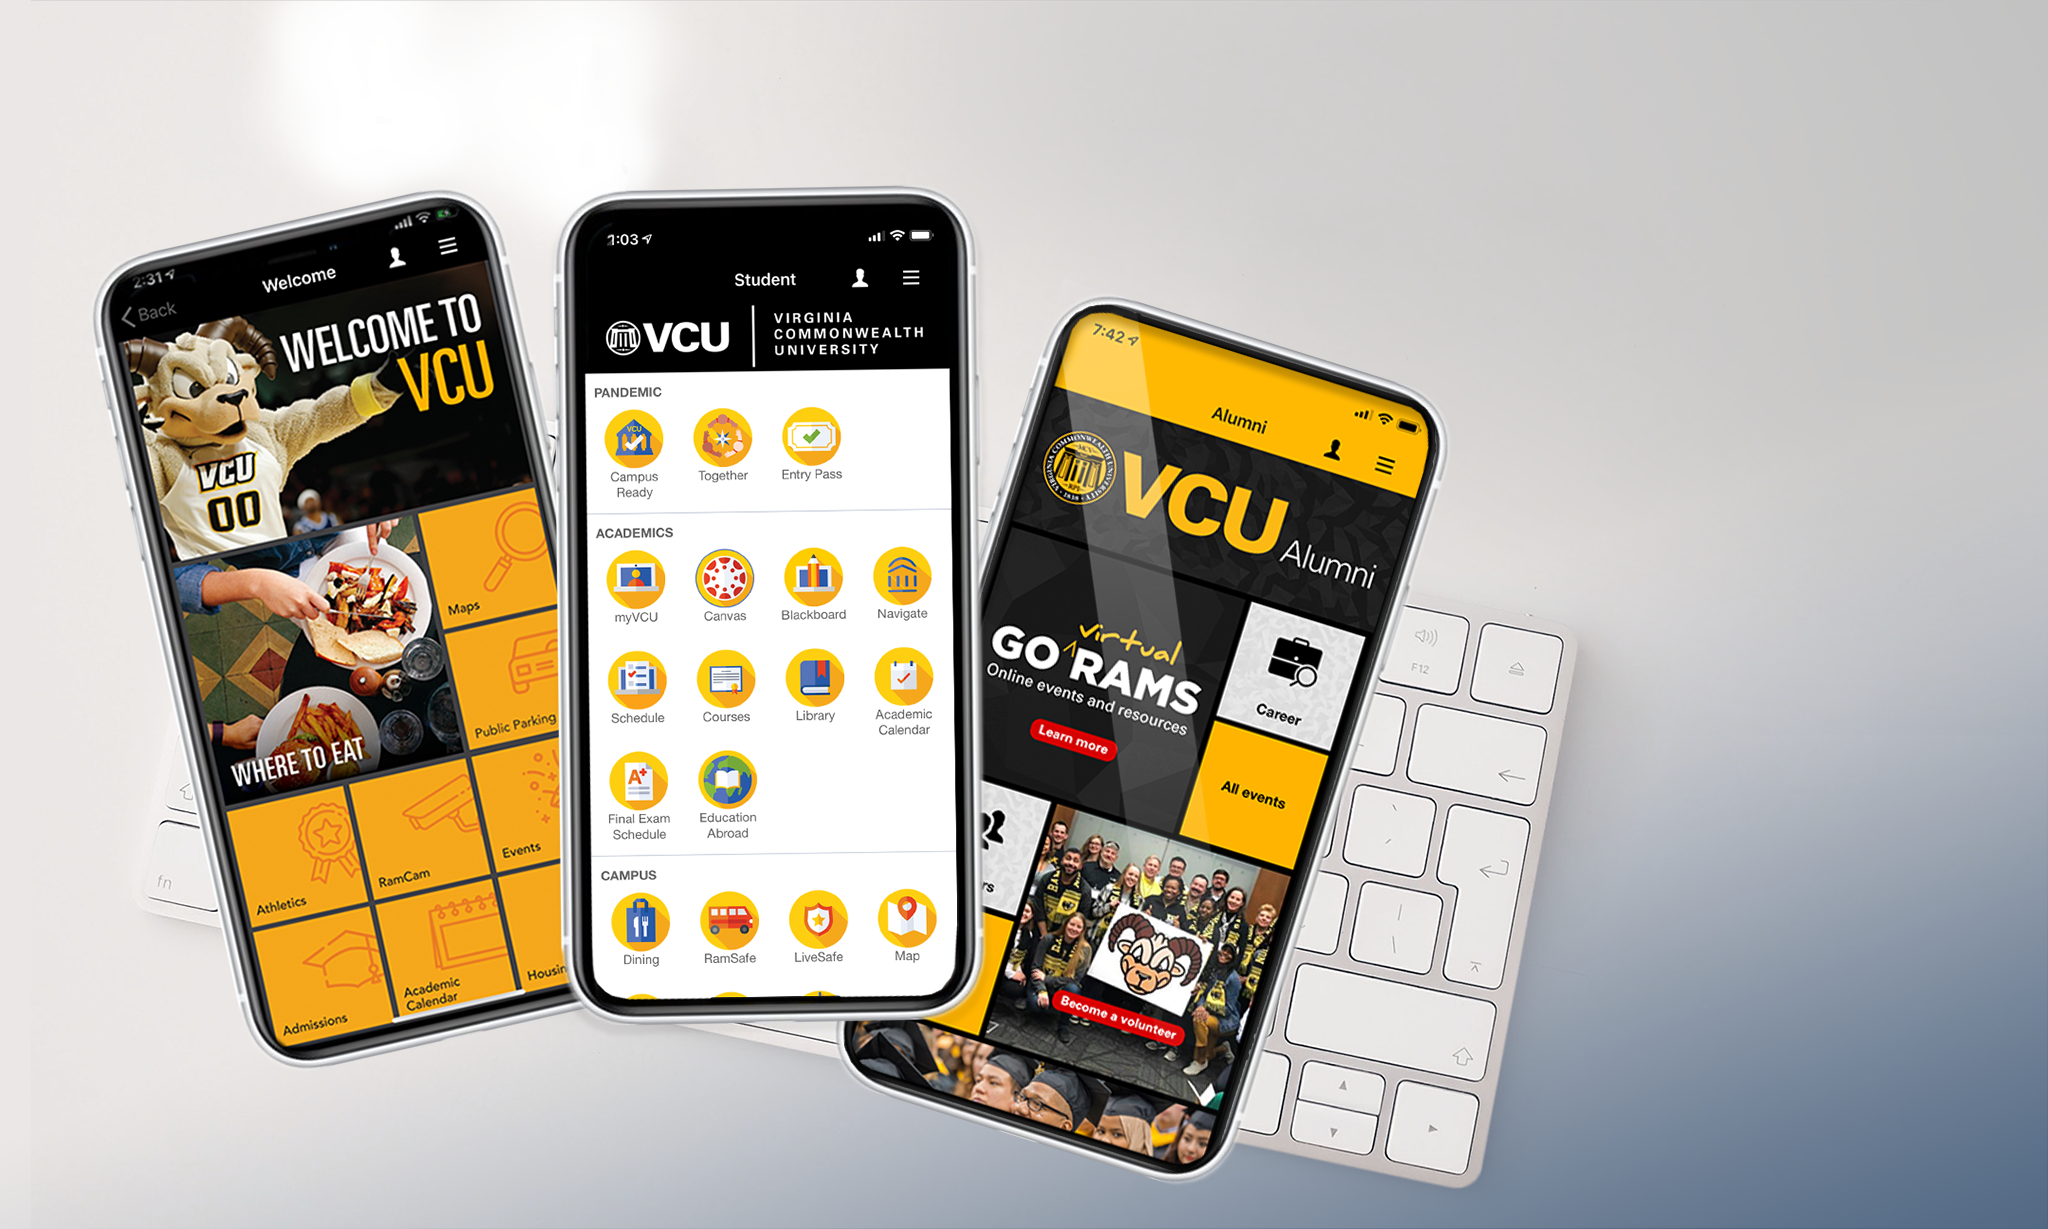 VCU now fits in the palm of your hand